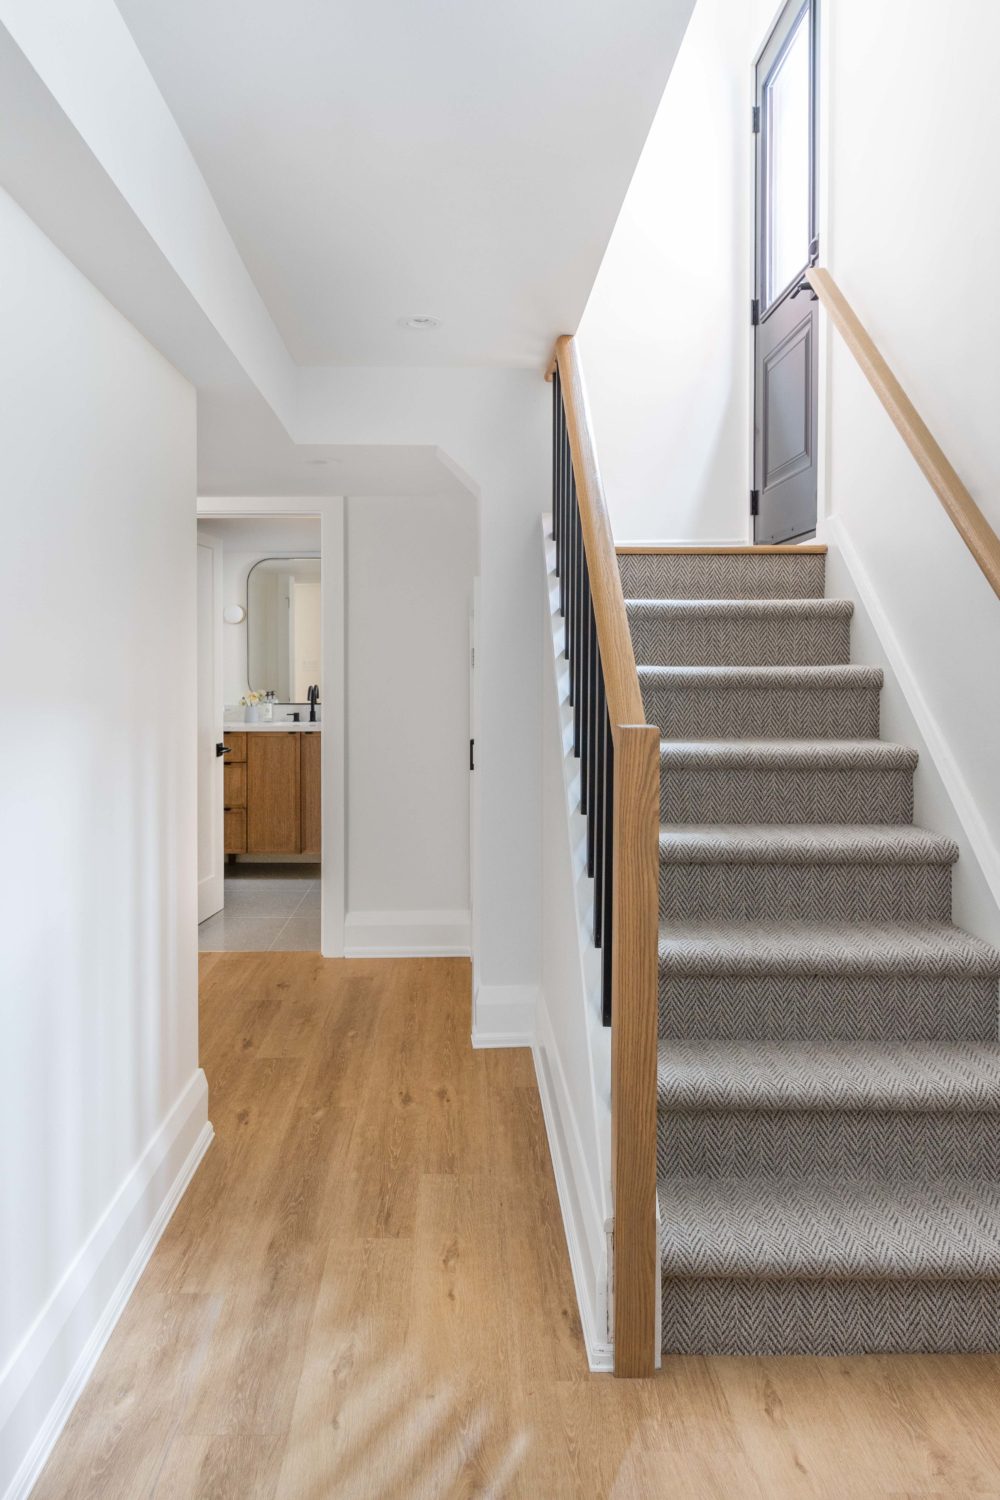 Brockton Village Toronto Home Renovation Front Entrance and Stairs